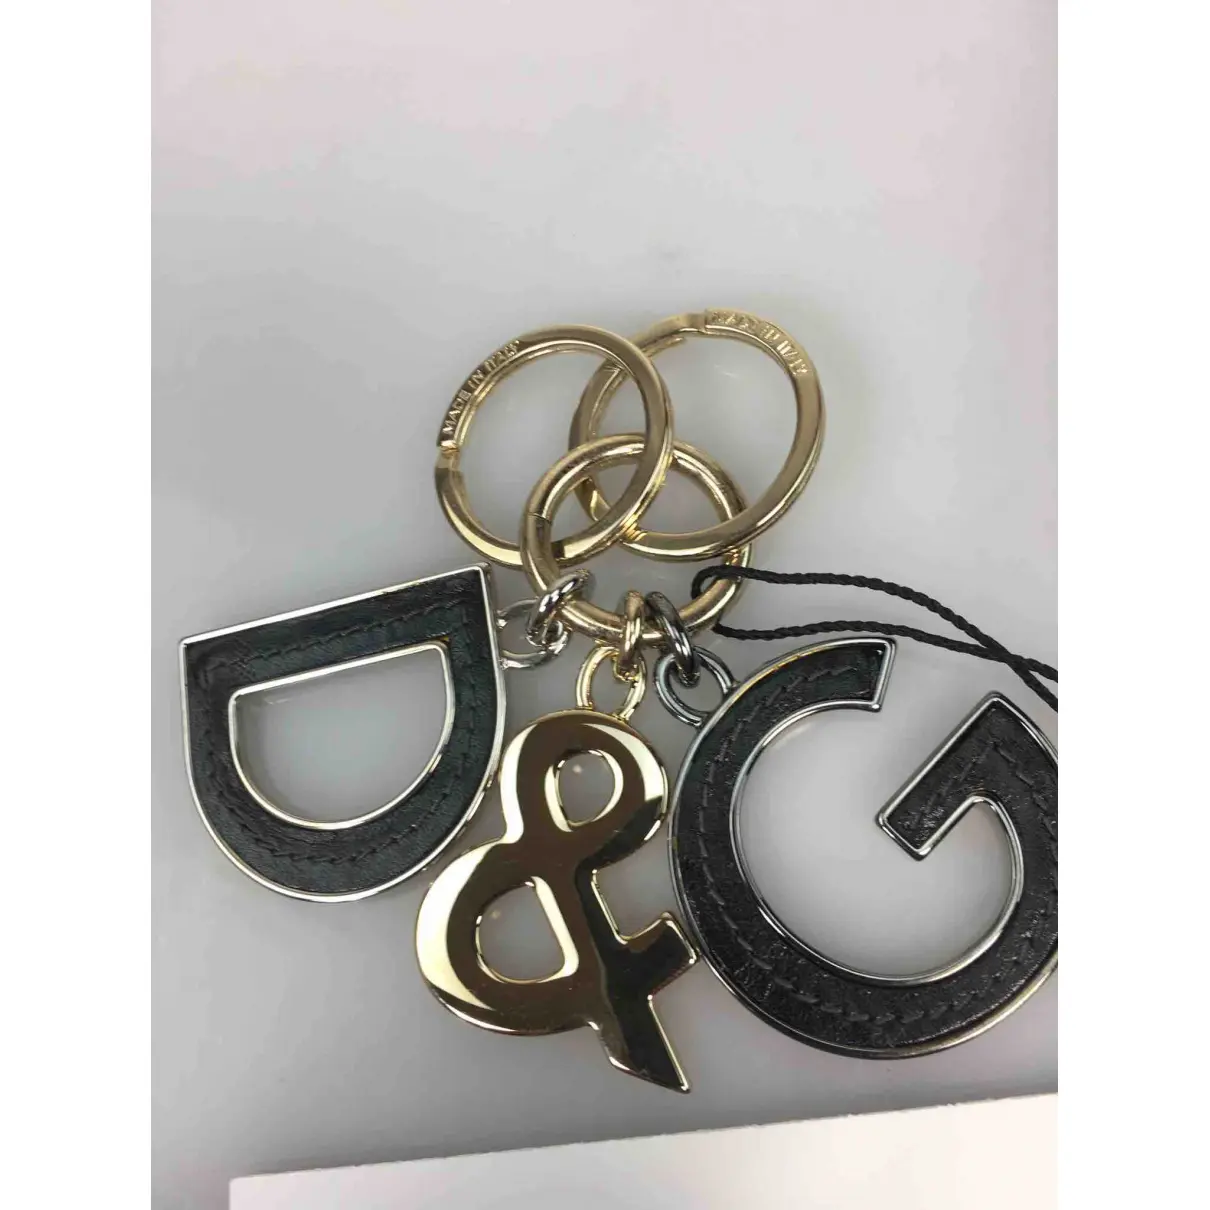 Leather key ring D&G